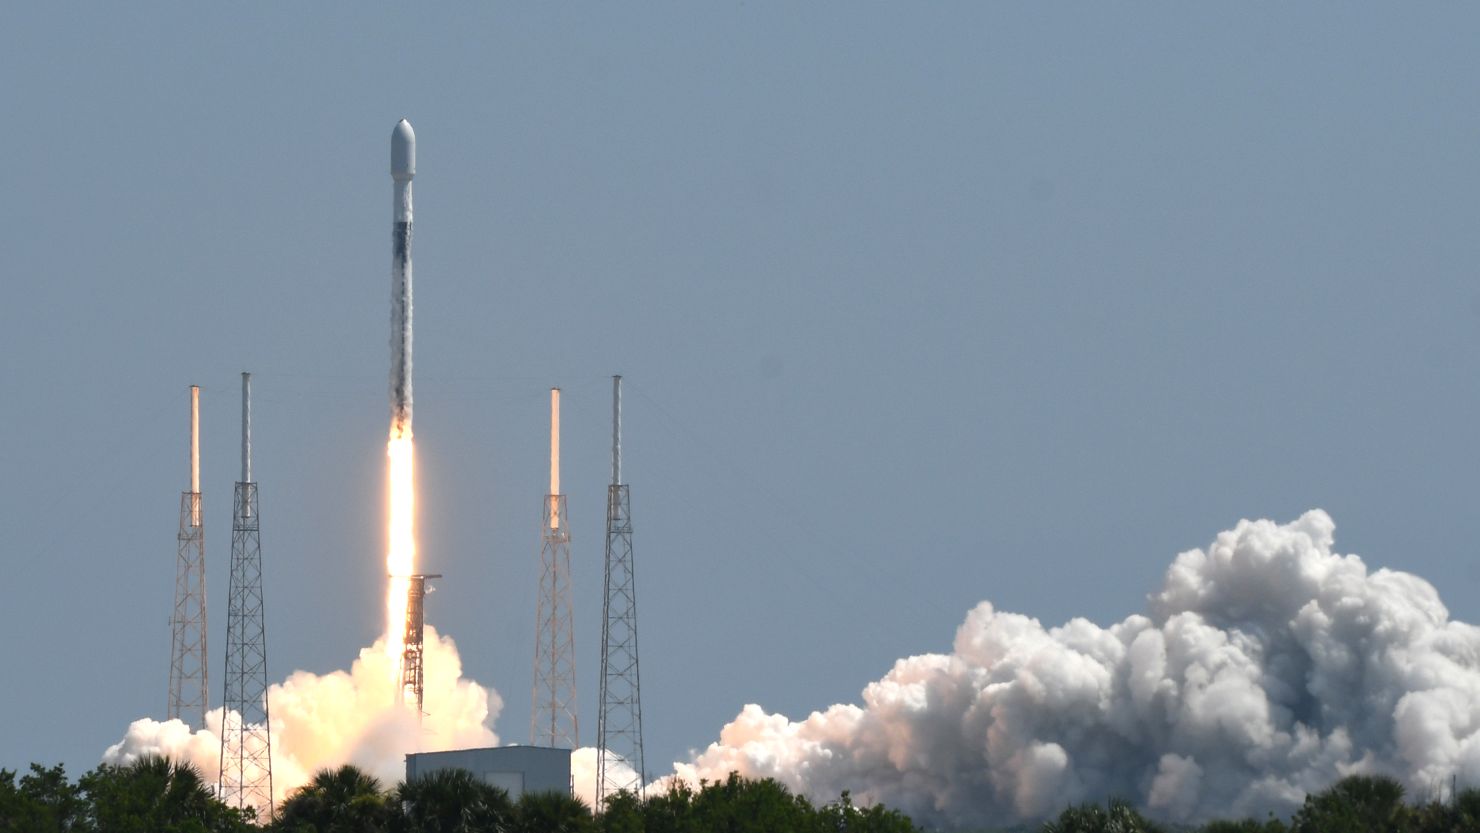 A SpaceX Falcon 9 rocket lifts off from pad 40 at Cape Canaveral Space Force Station carrying the Euclid Space Telescope for the European Space Agency on July 1, 2023 in Cape Canaveral, Florida. The Euclid telescope will explore the evolution of the dark universe.